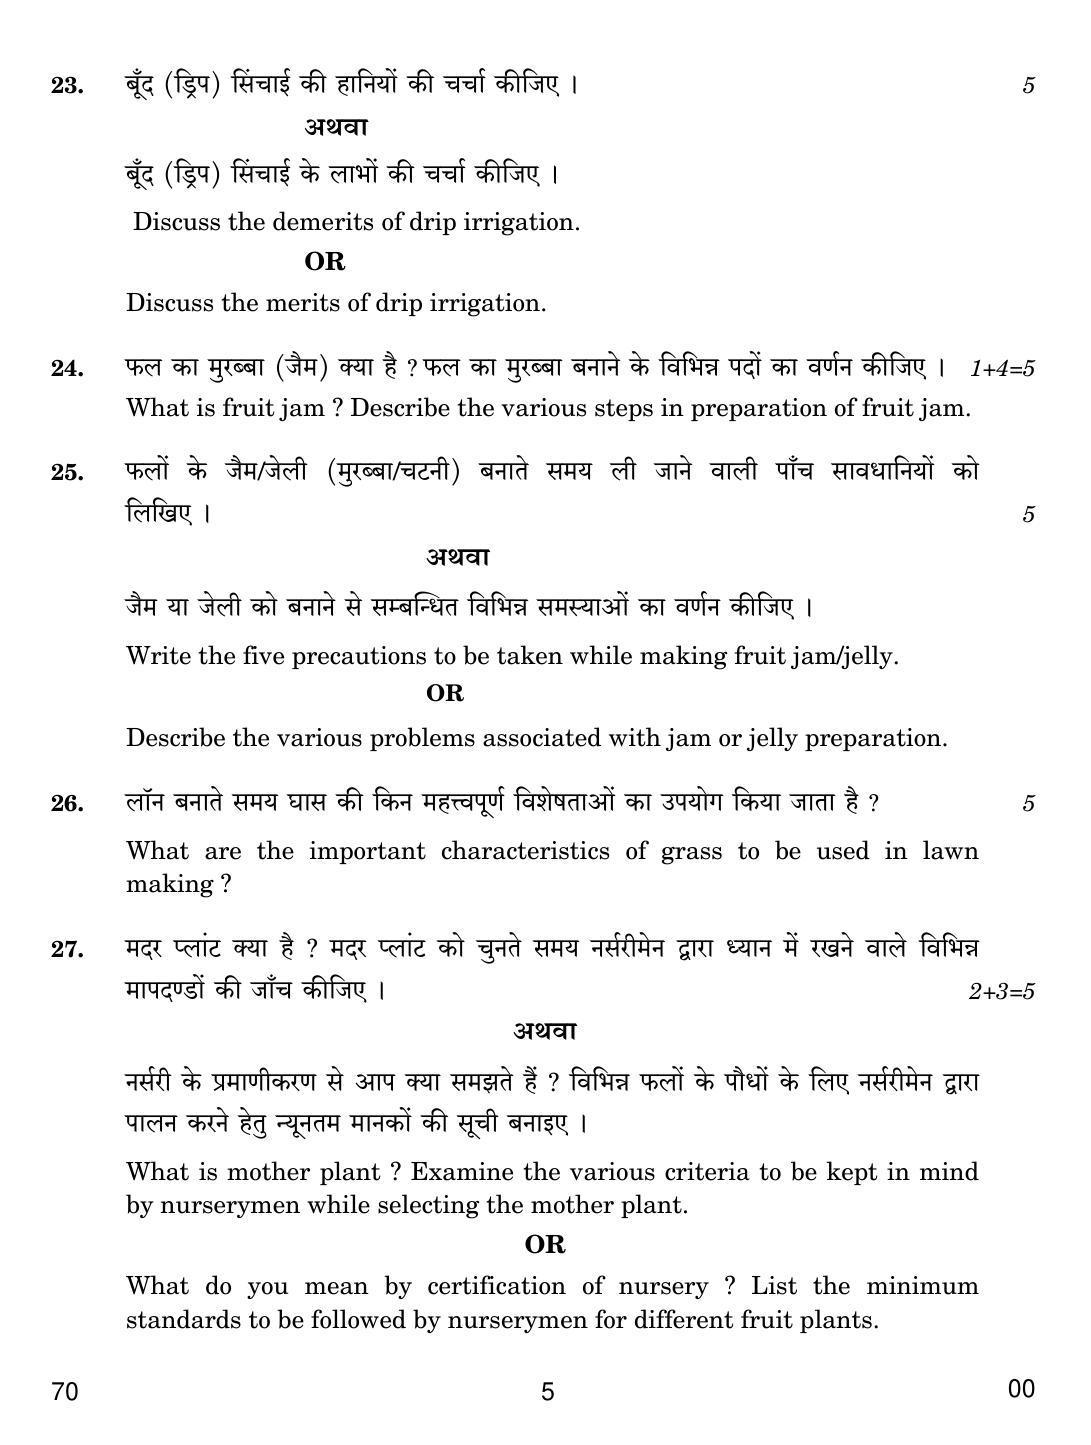 CBSE Class 12 70 Agriculture 2019 Question Paper - Page 5